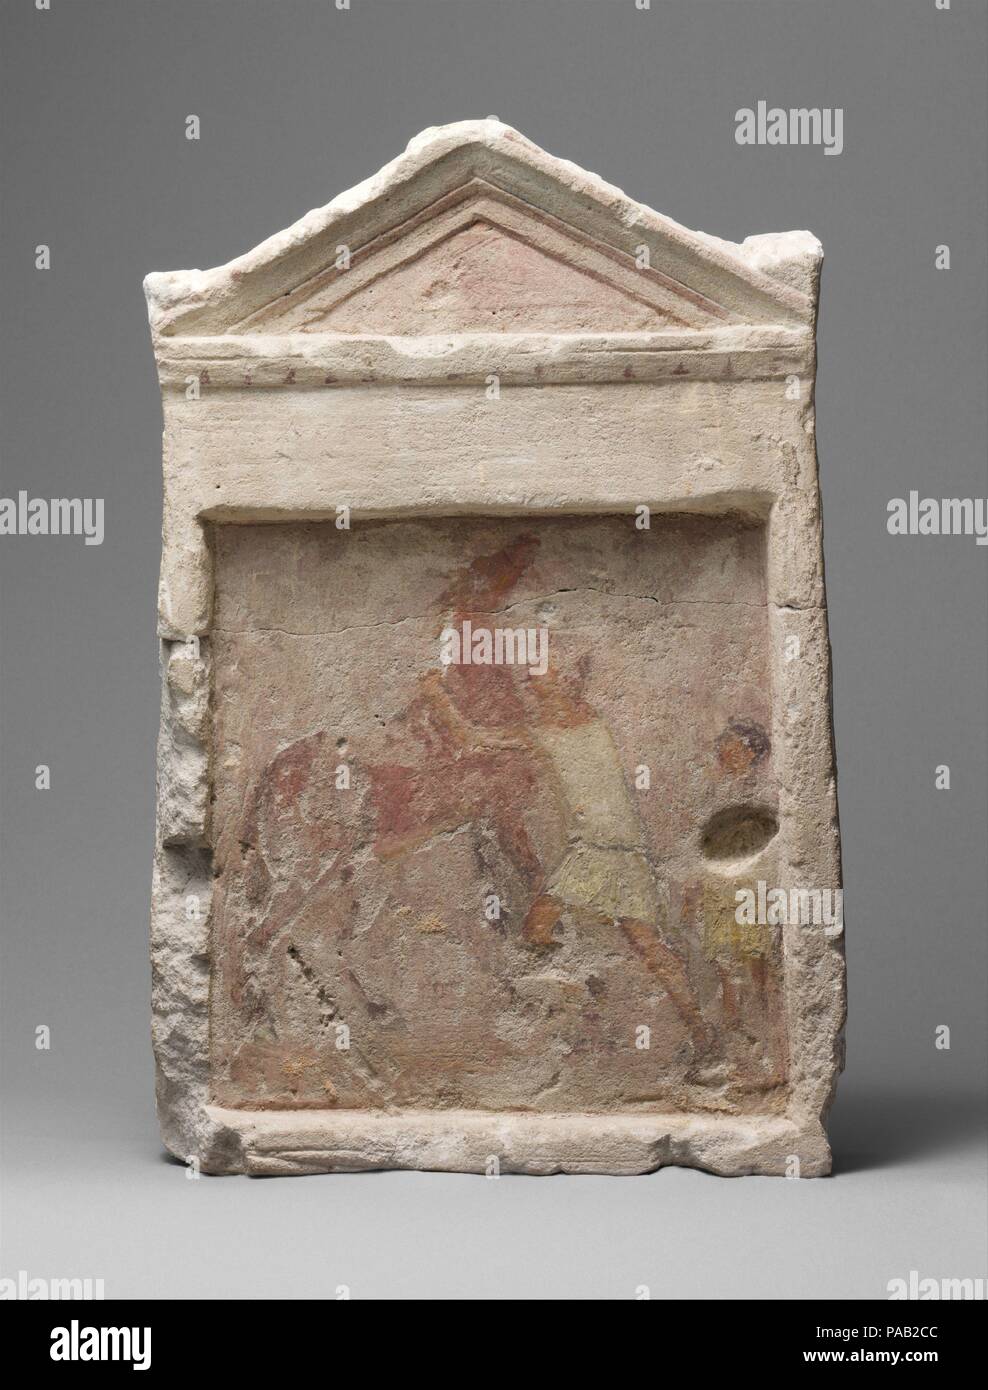 Painted limestone funerary slab with a man controlling a rearing horse. Culture: Greek. Dimensions: Height: 15 1/2 × 10 1/2 × 2 7/8 in. (39.4 × 26.7 × 7.3 cm). Date: 2nd half of 3rd century B.C..  During the Ptolemaic period a distinctive type of subterranean tomb for multiple burials proliferated in the cemeteries around the city of Alexandria. Underground chambers cut into the living rock radiated from a central courtyard open to the sky. Most chambers contained a number of loculi, long narrow niches cut into the walls, which served as burial slots. Some loculi were sealed with painted limes Stock Photo